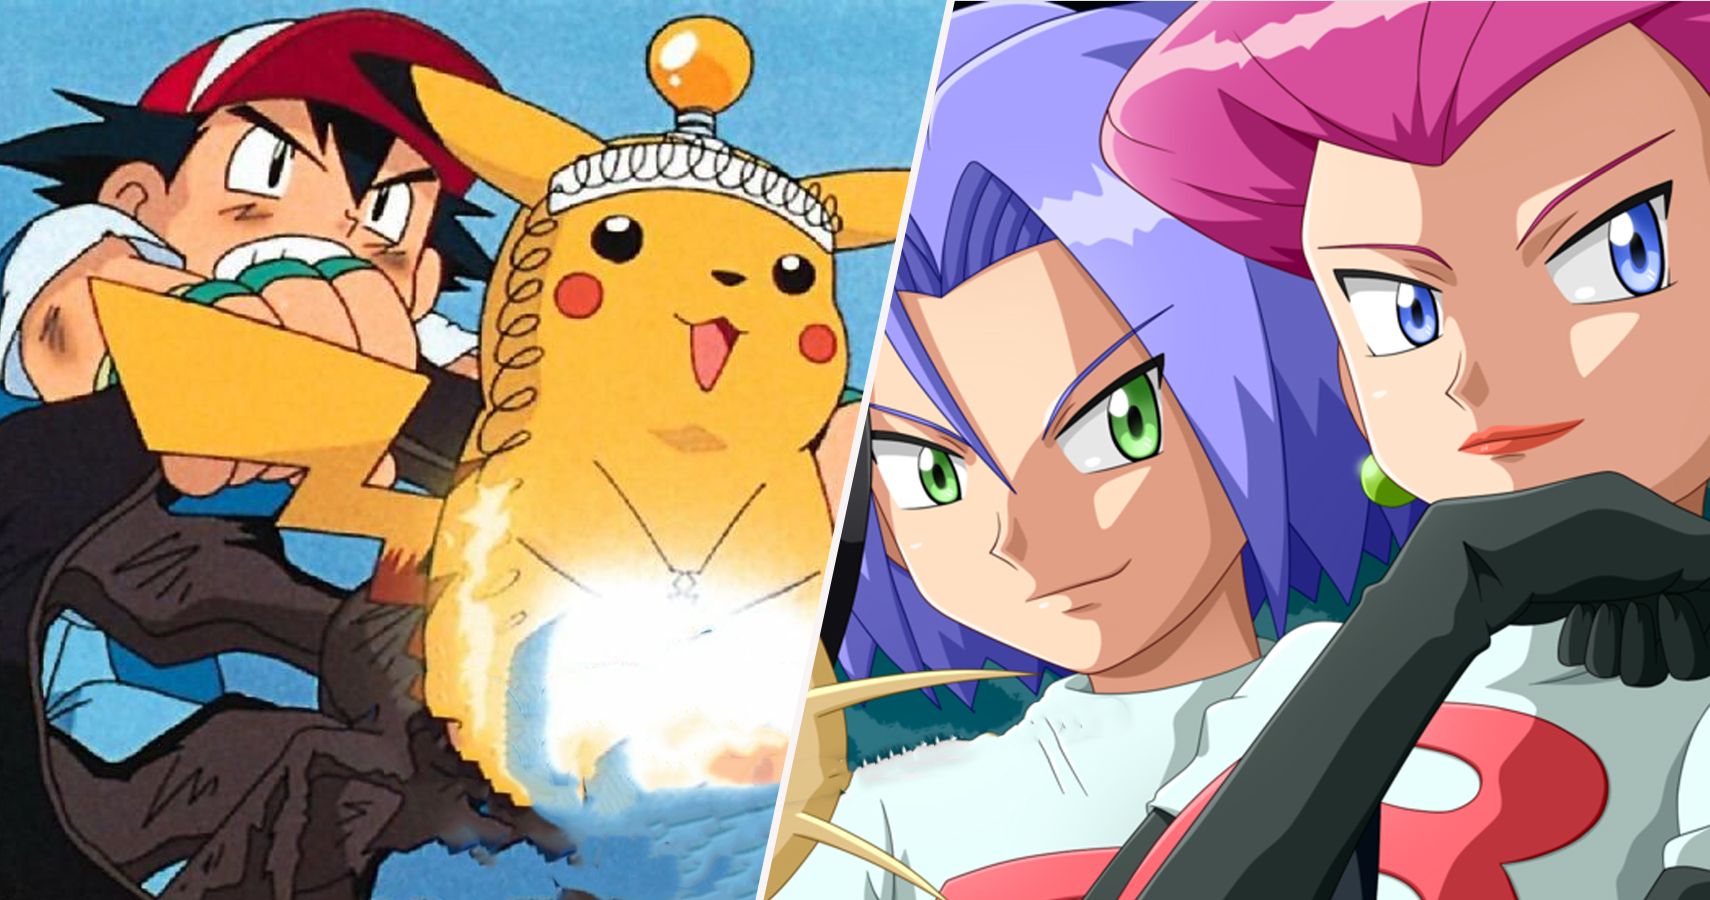 The 15 Best Episodes Of The Pokémon TV Show (And 15 That Are Crazy Boring)